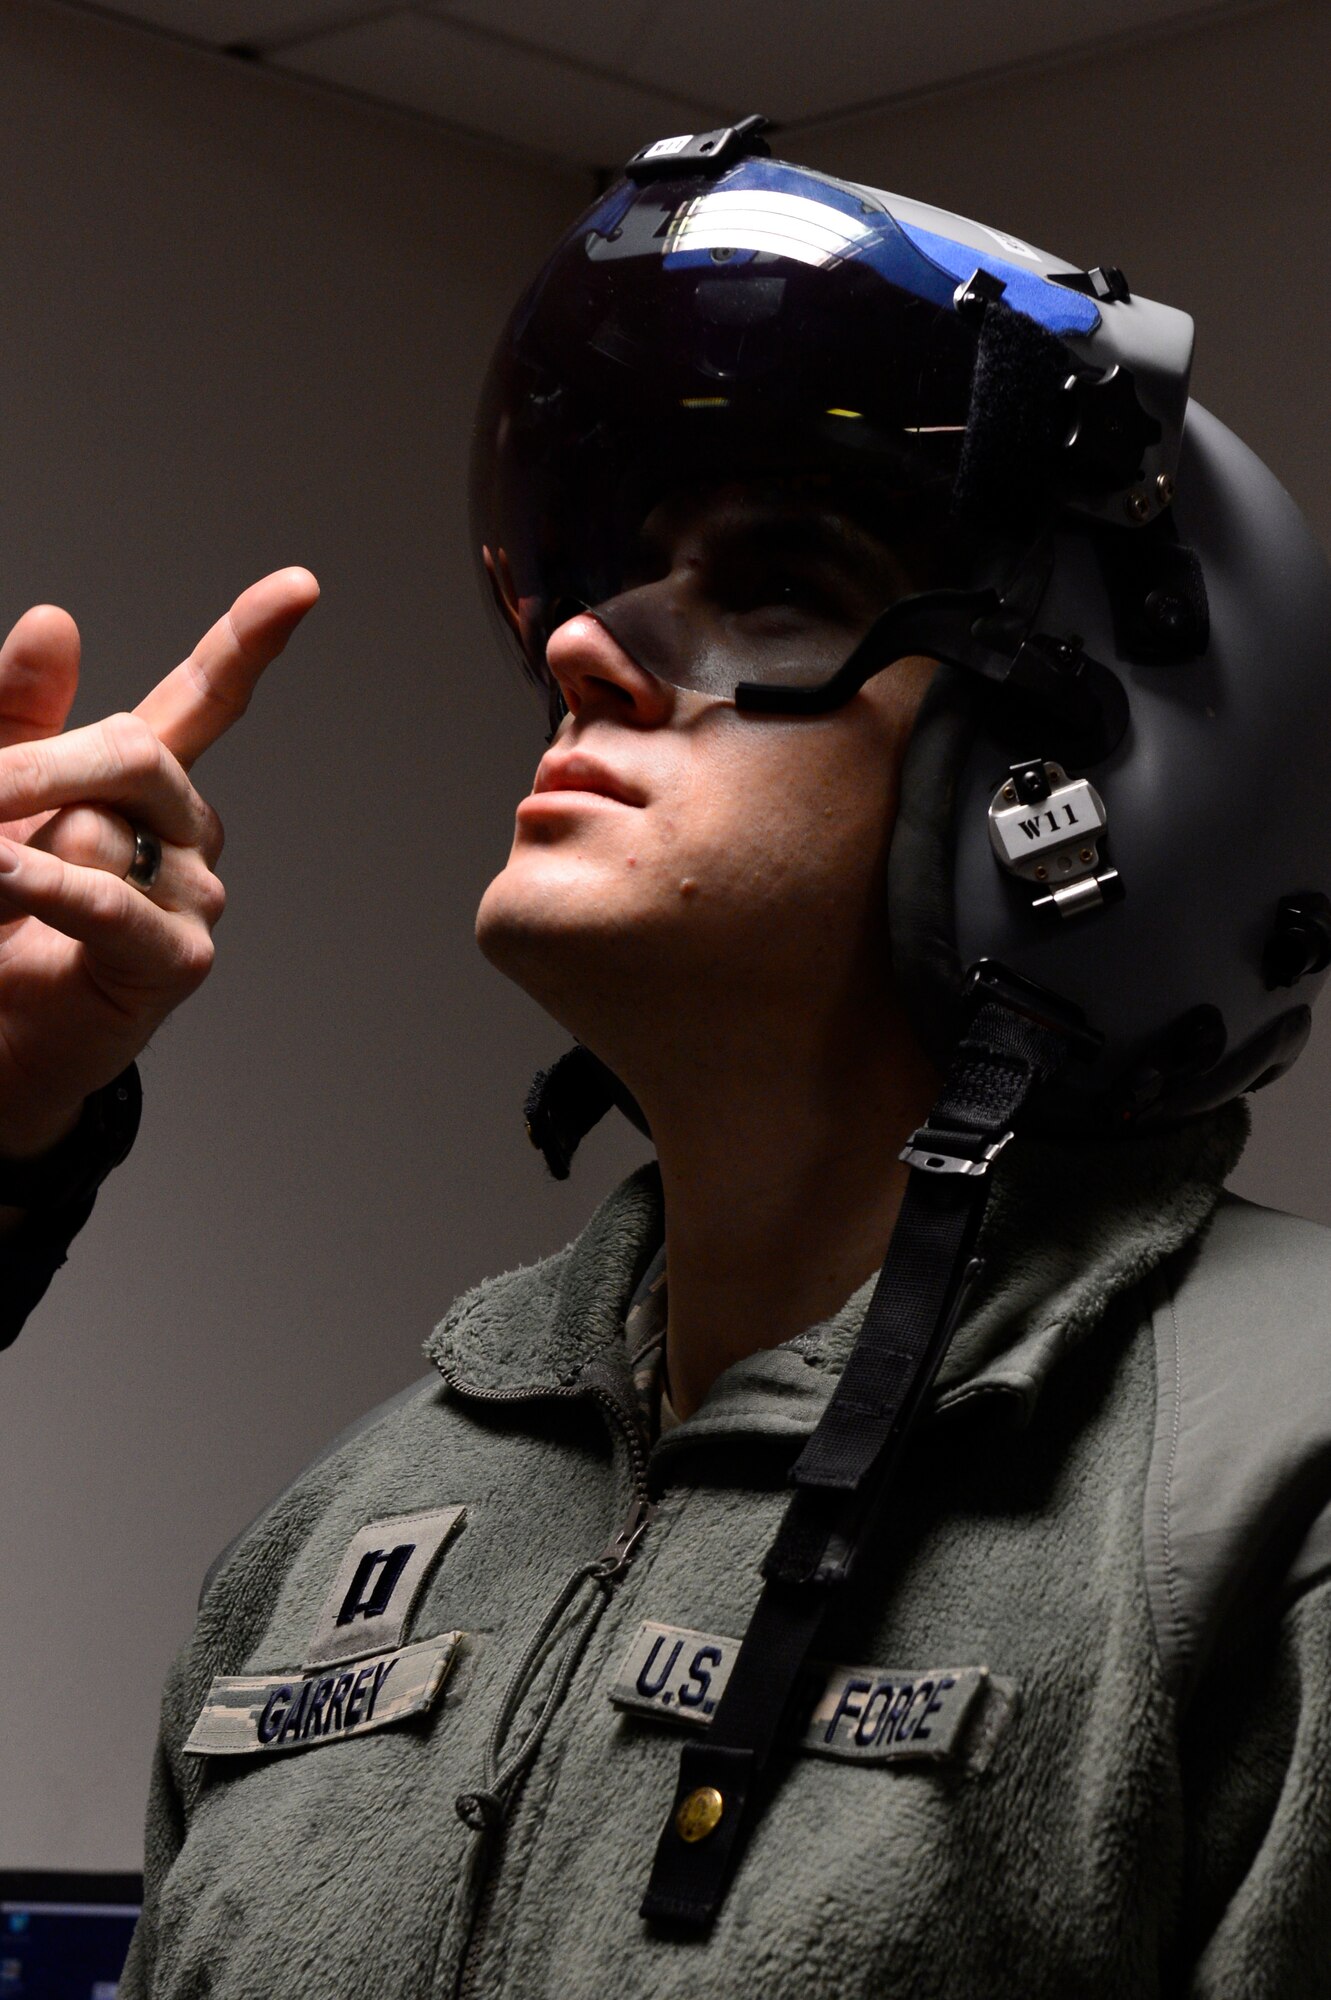 The F-16 helmets have a target grid within them that makes it easy for pilots to track the enemy.